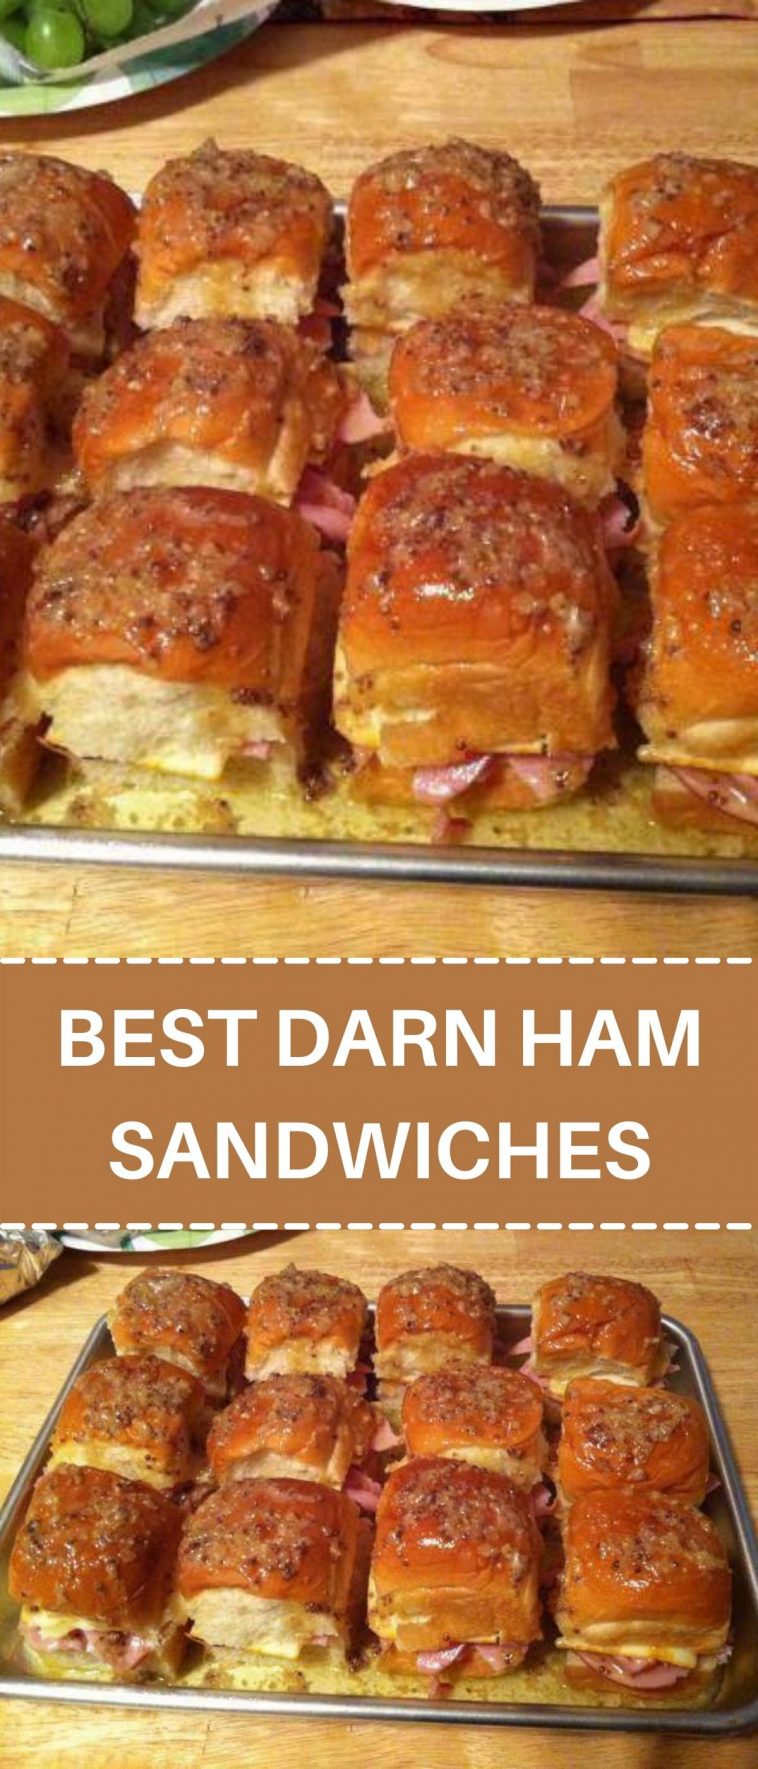 BEST DARN HAM SANDWICHES YOU’LL EVER HAVE!!!